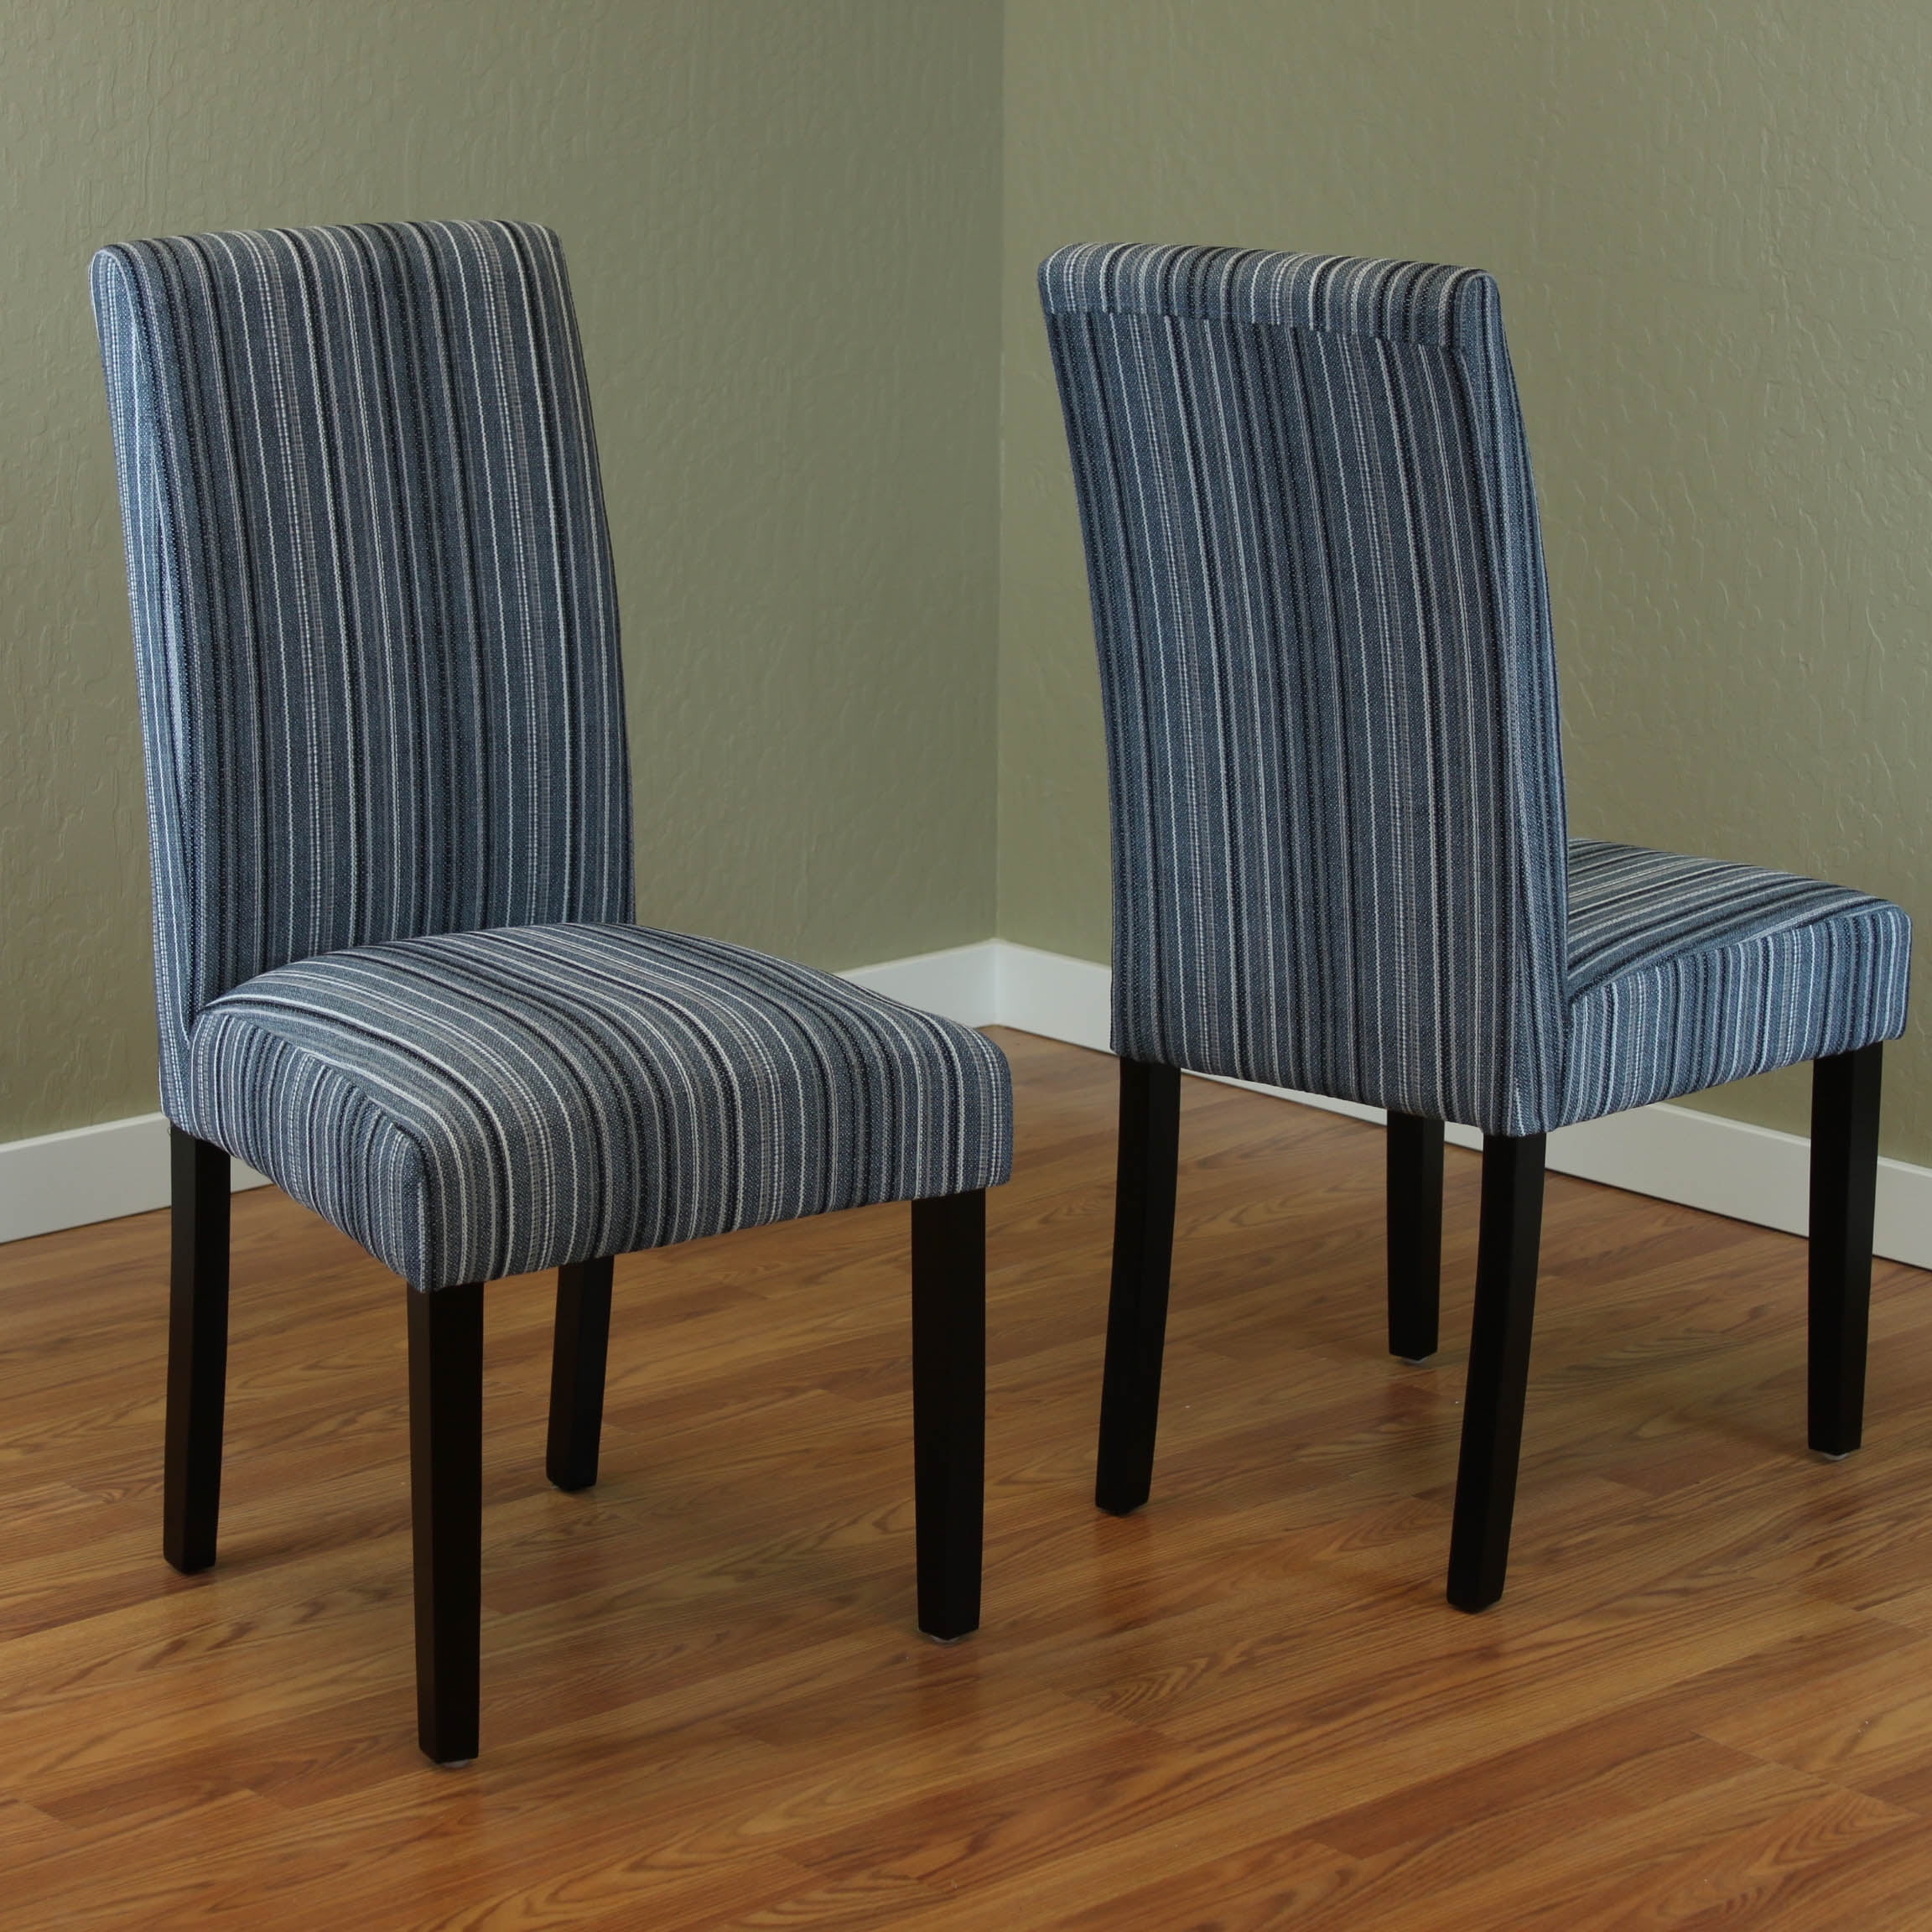 Seville Teal Stripe Fabric Dining Chairs (Set of 2) - Walmart.com